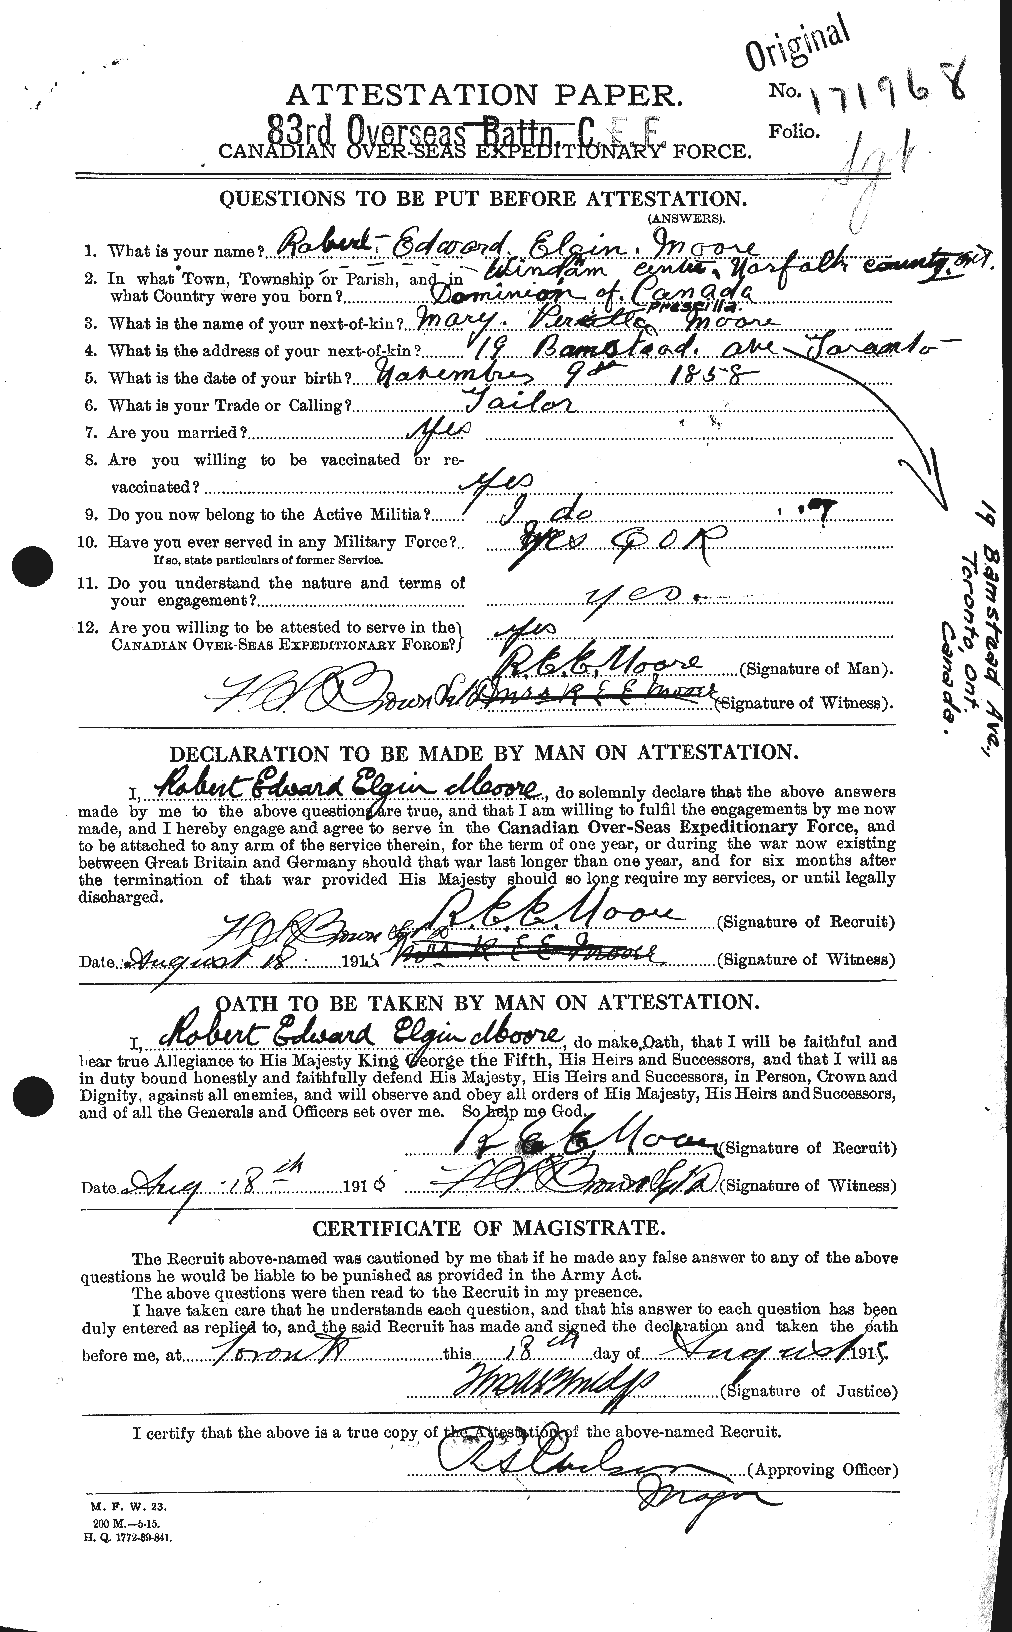 Personnel Records of the First World War - CEF 503562a